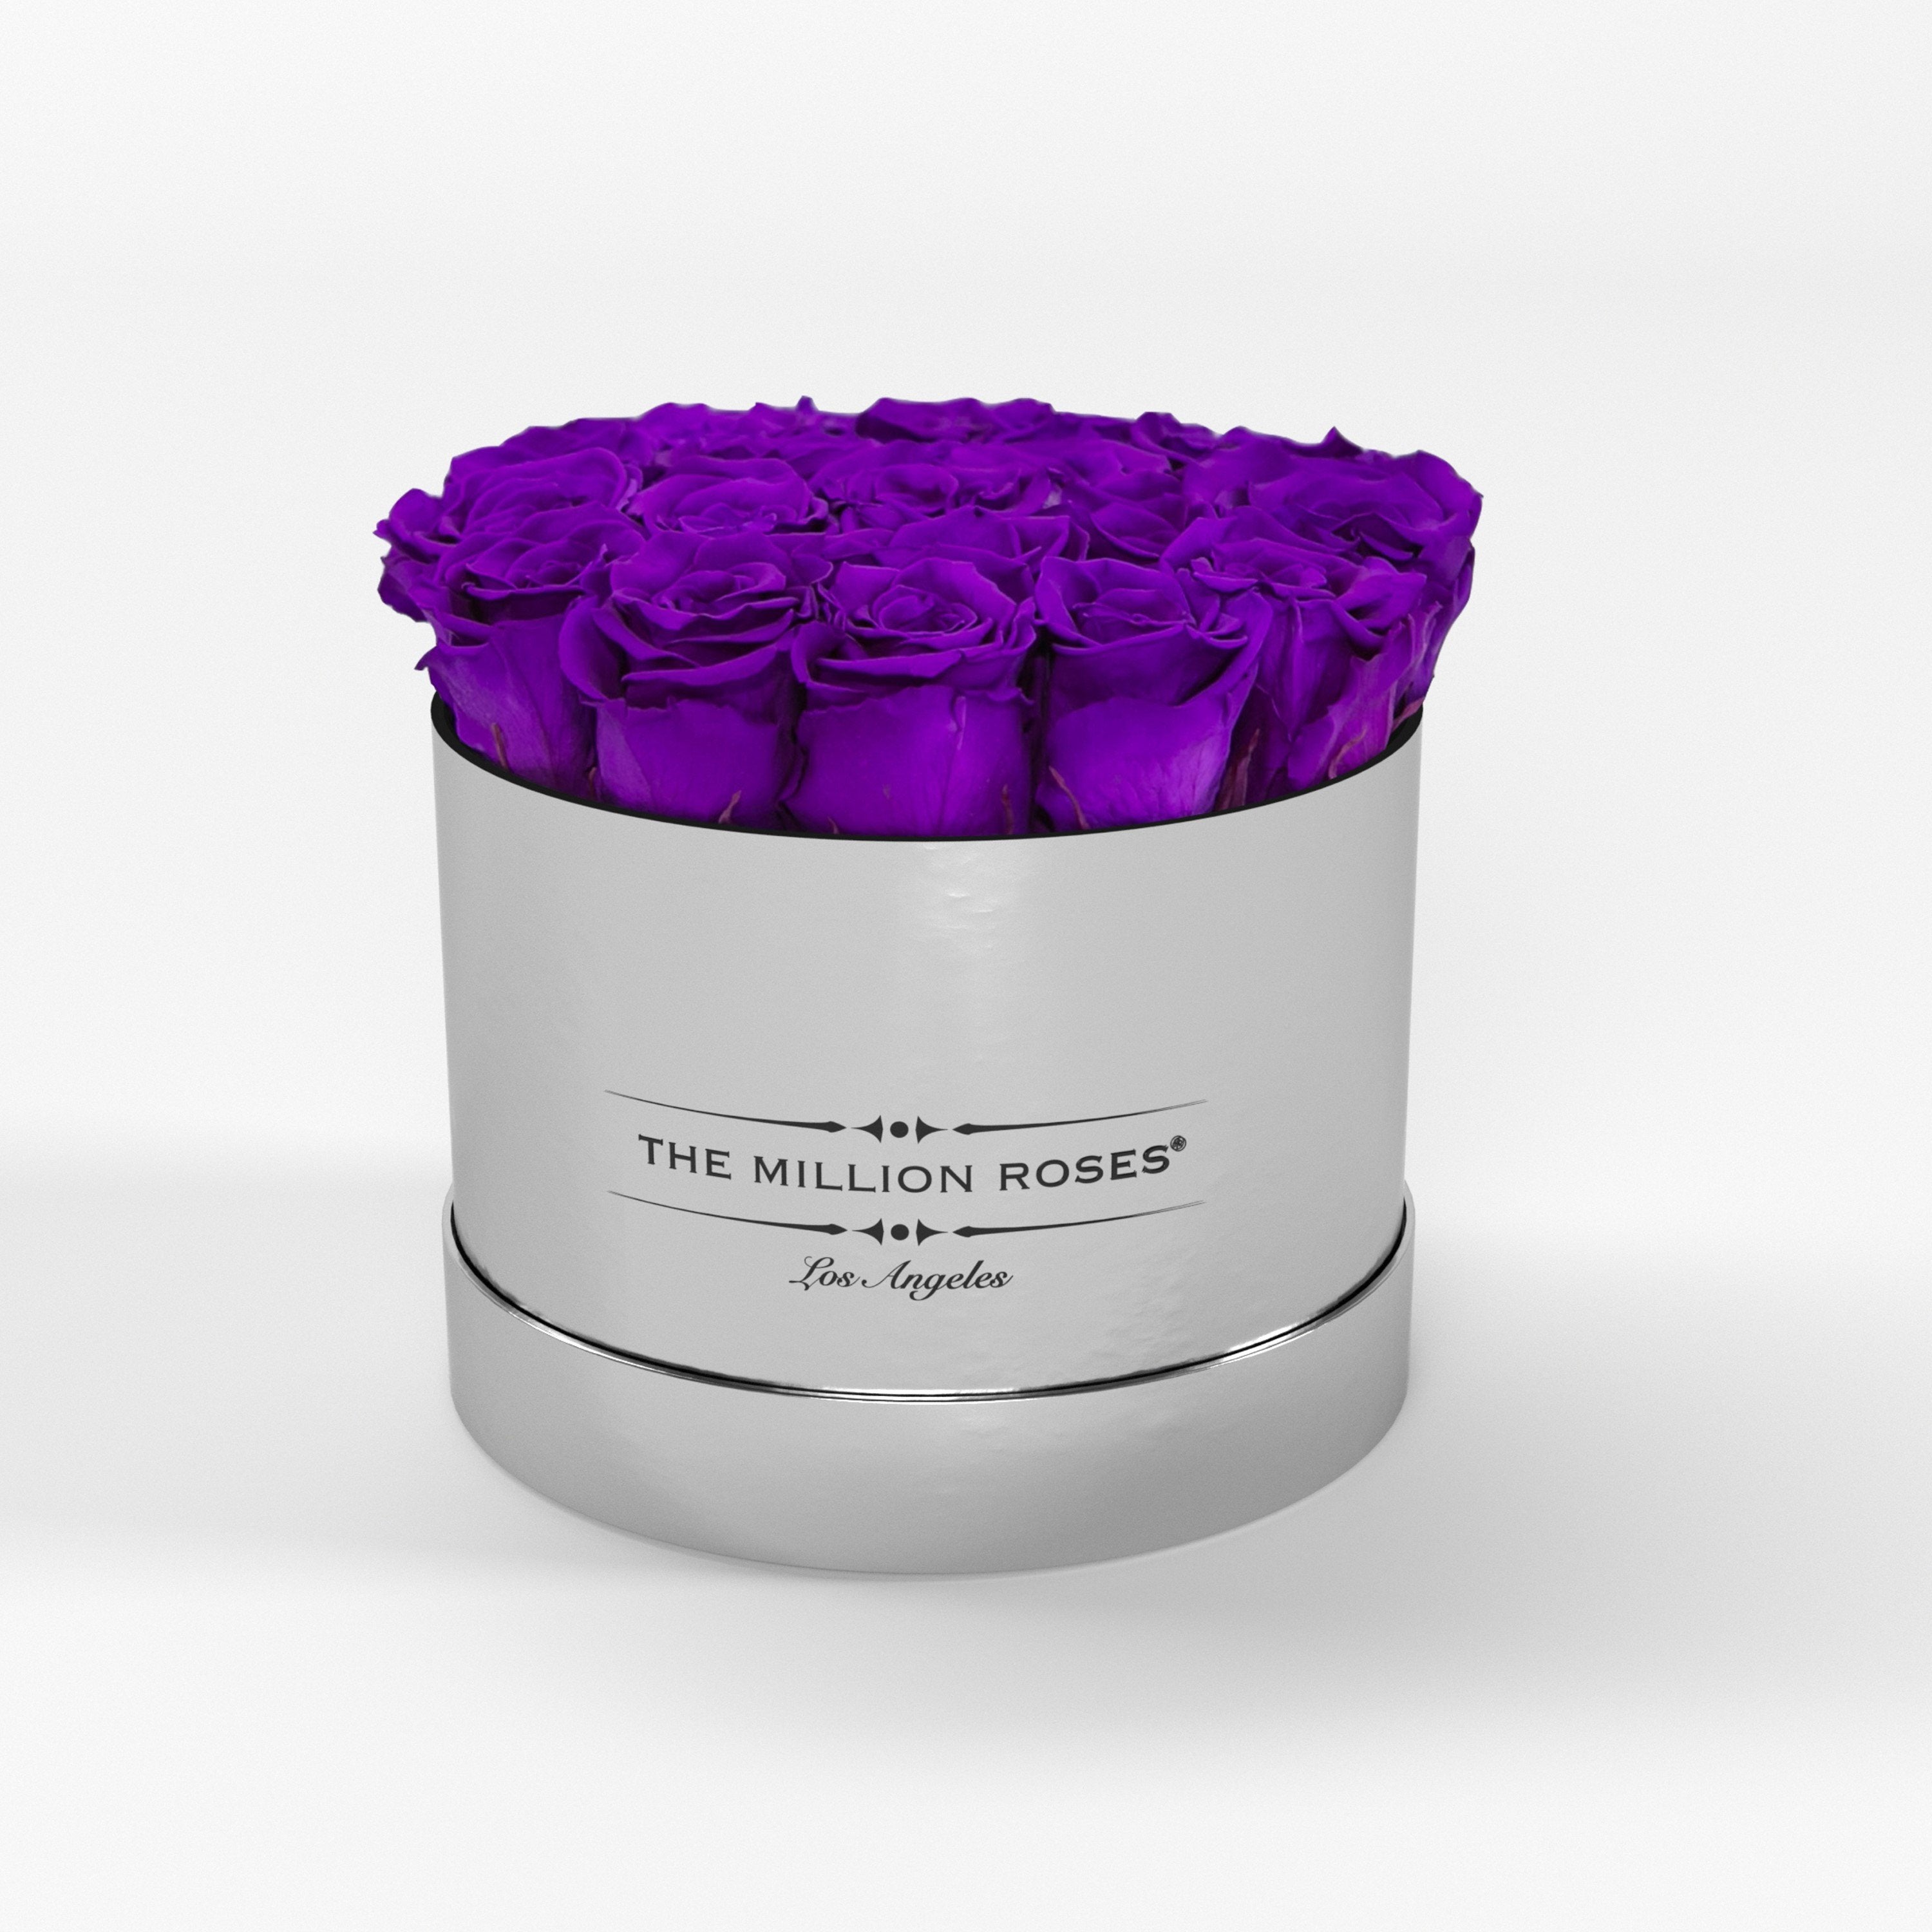 ( LA ) Silver - Classic Box with Bright Purple Roses Kit - the million roses